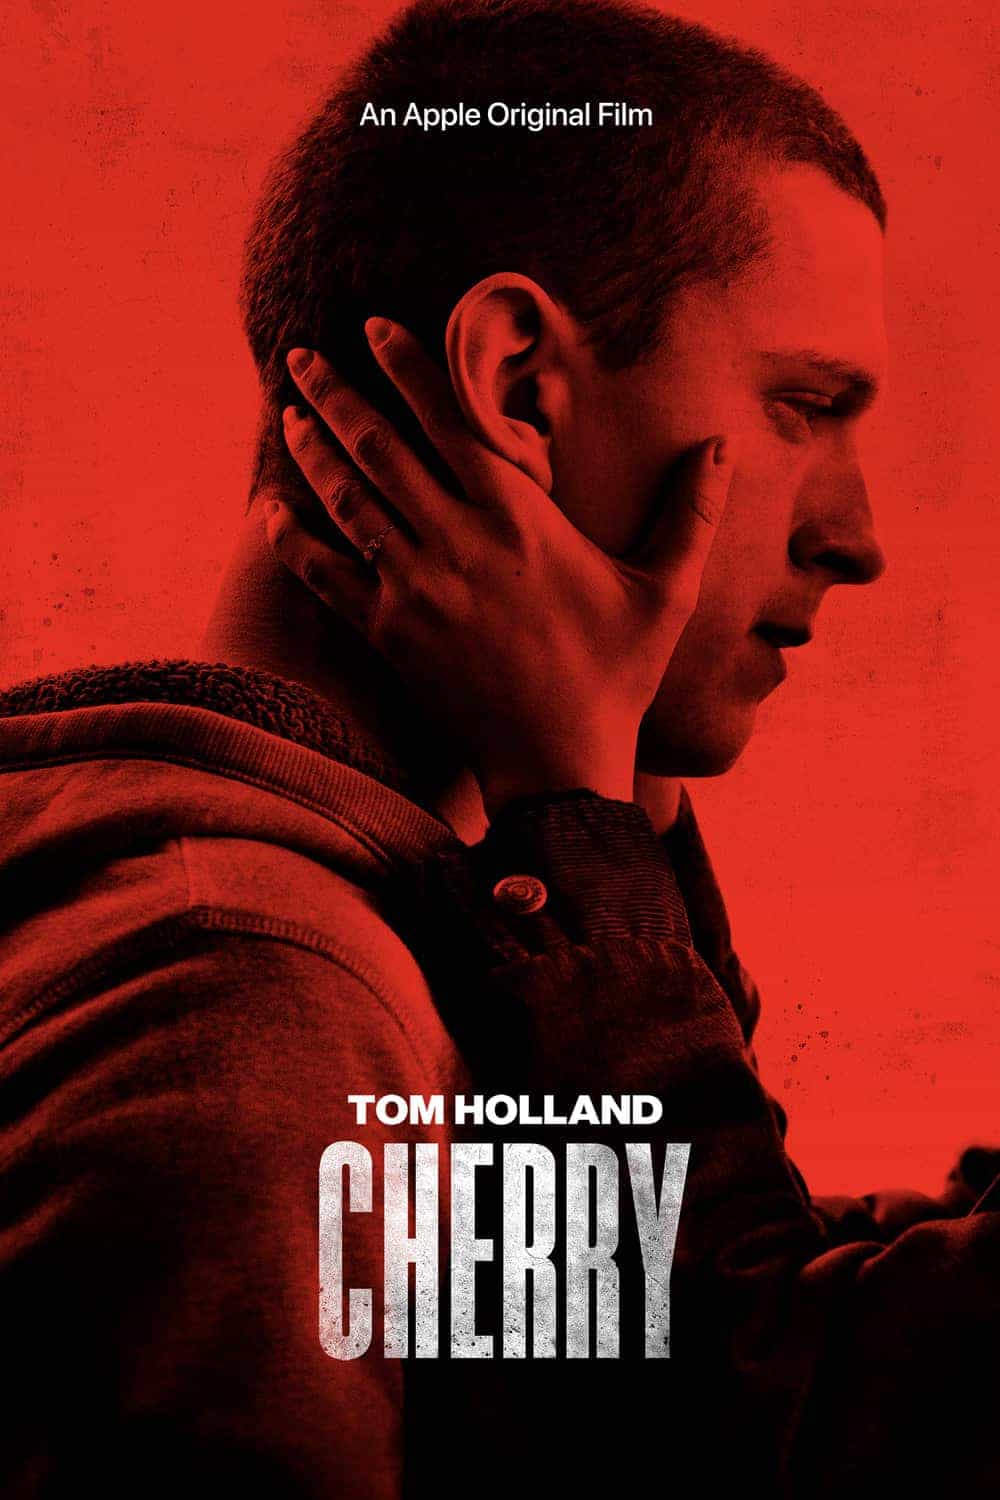 New movie preview weekend March 12th 2021:  Tom Holland stars in Cherry going directly to streaming in the UK